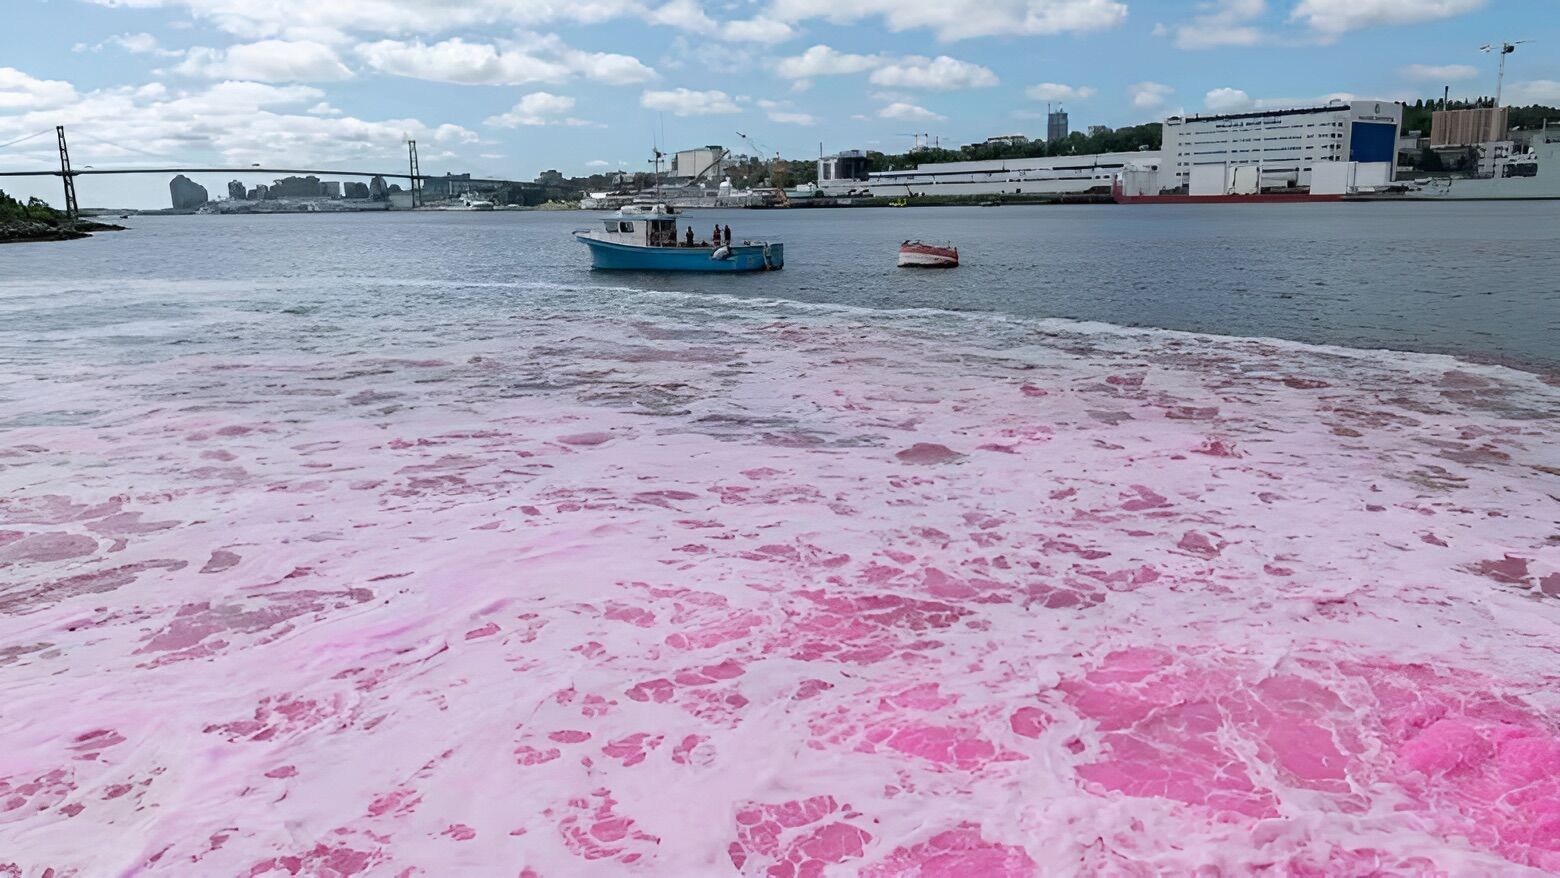 For science, the scientists dyed the port pink